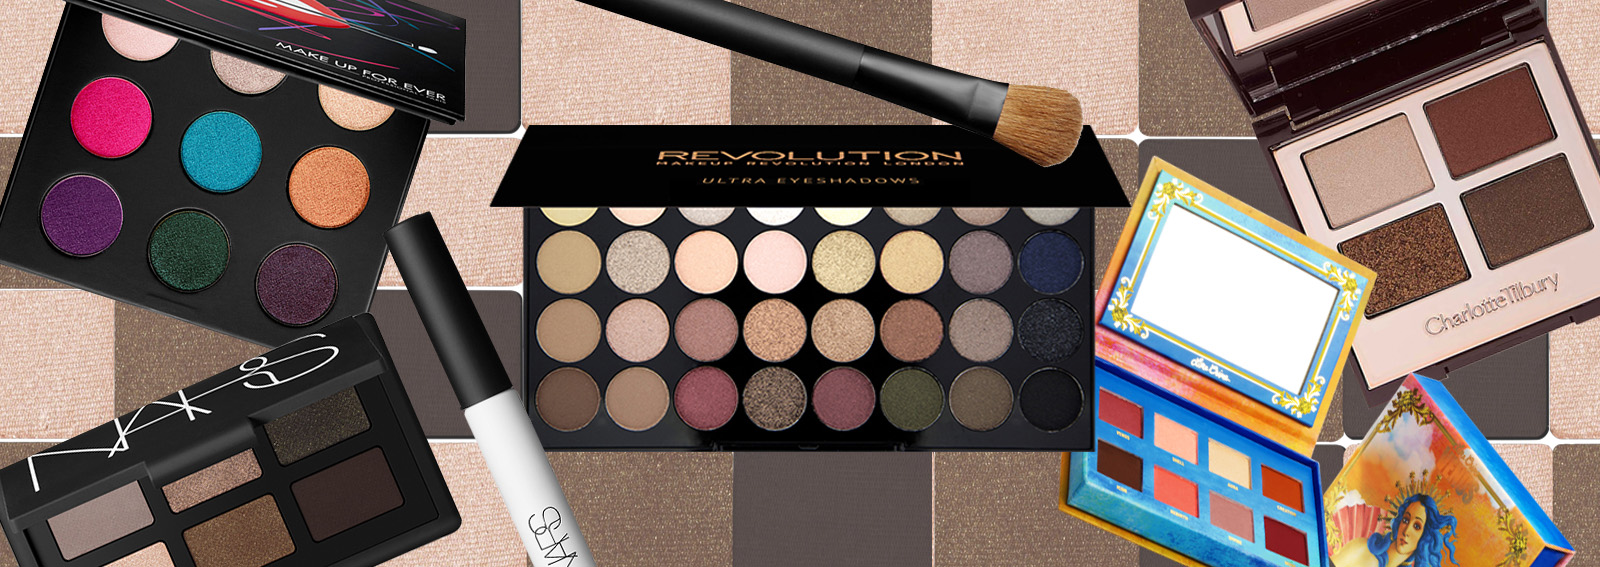 palette ombretti must have